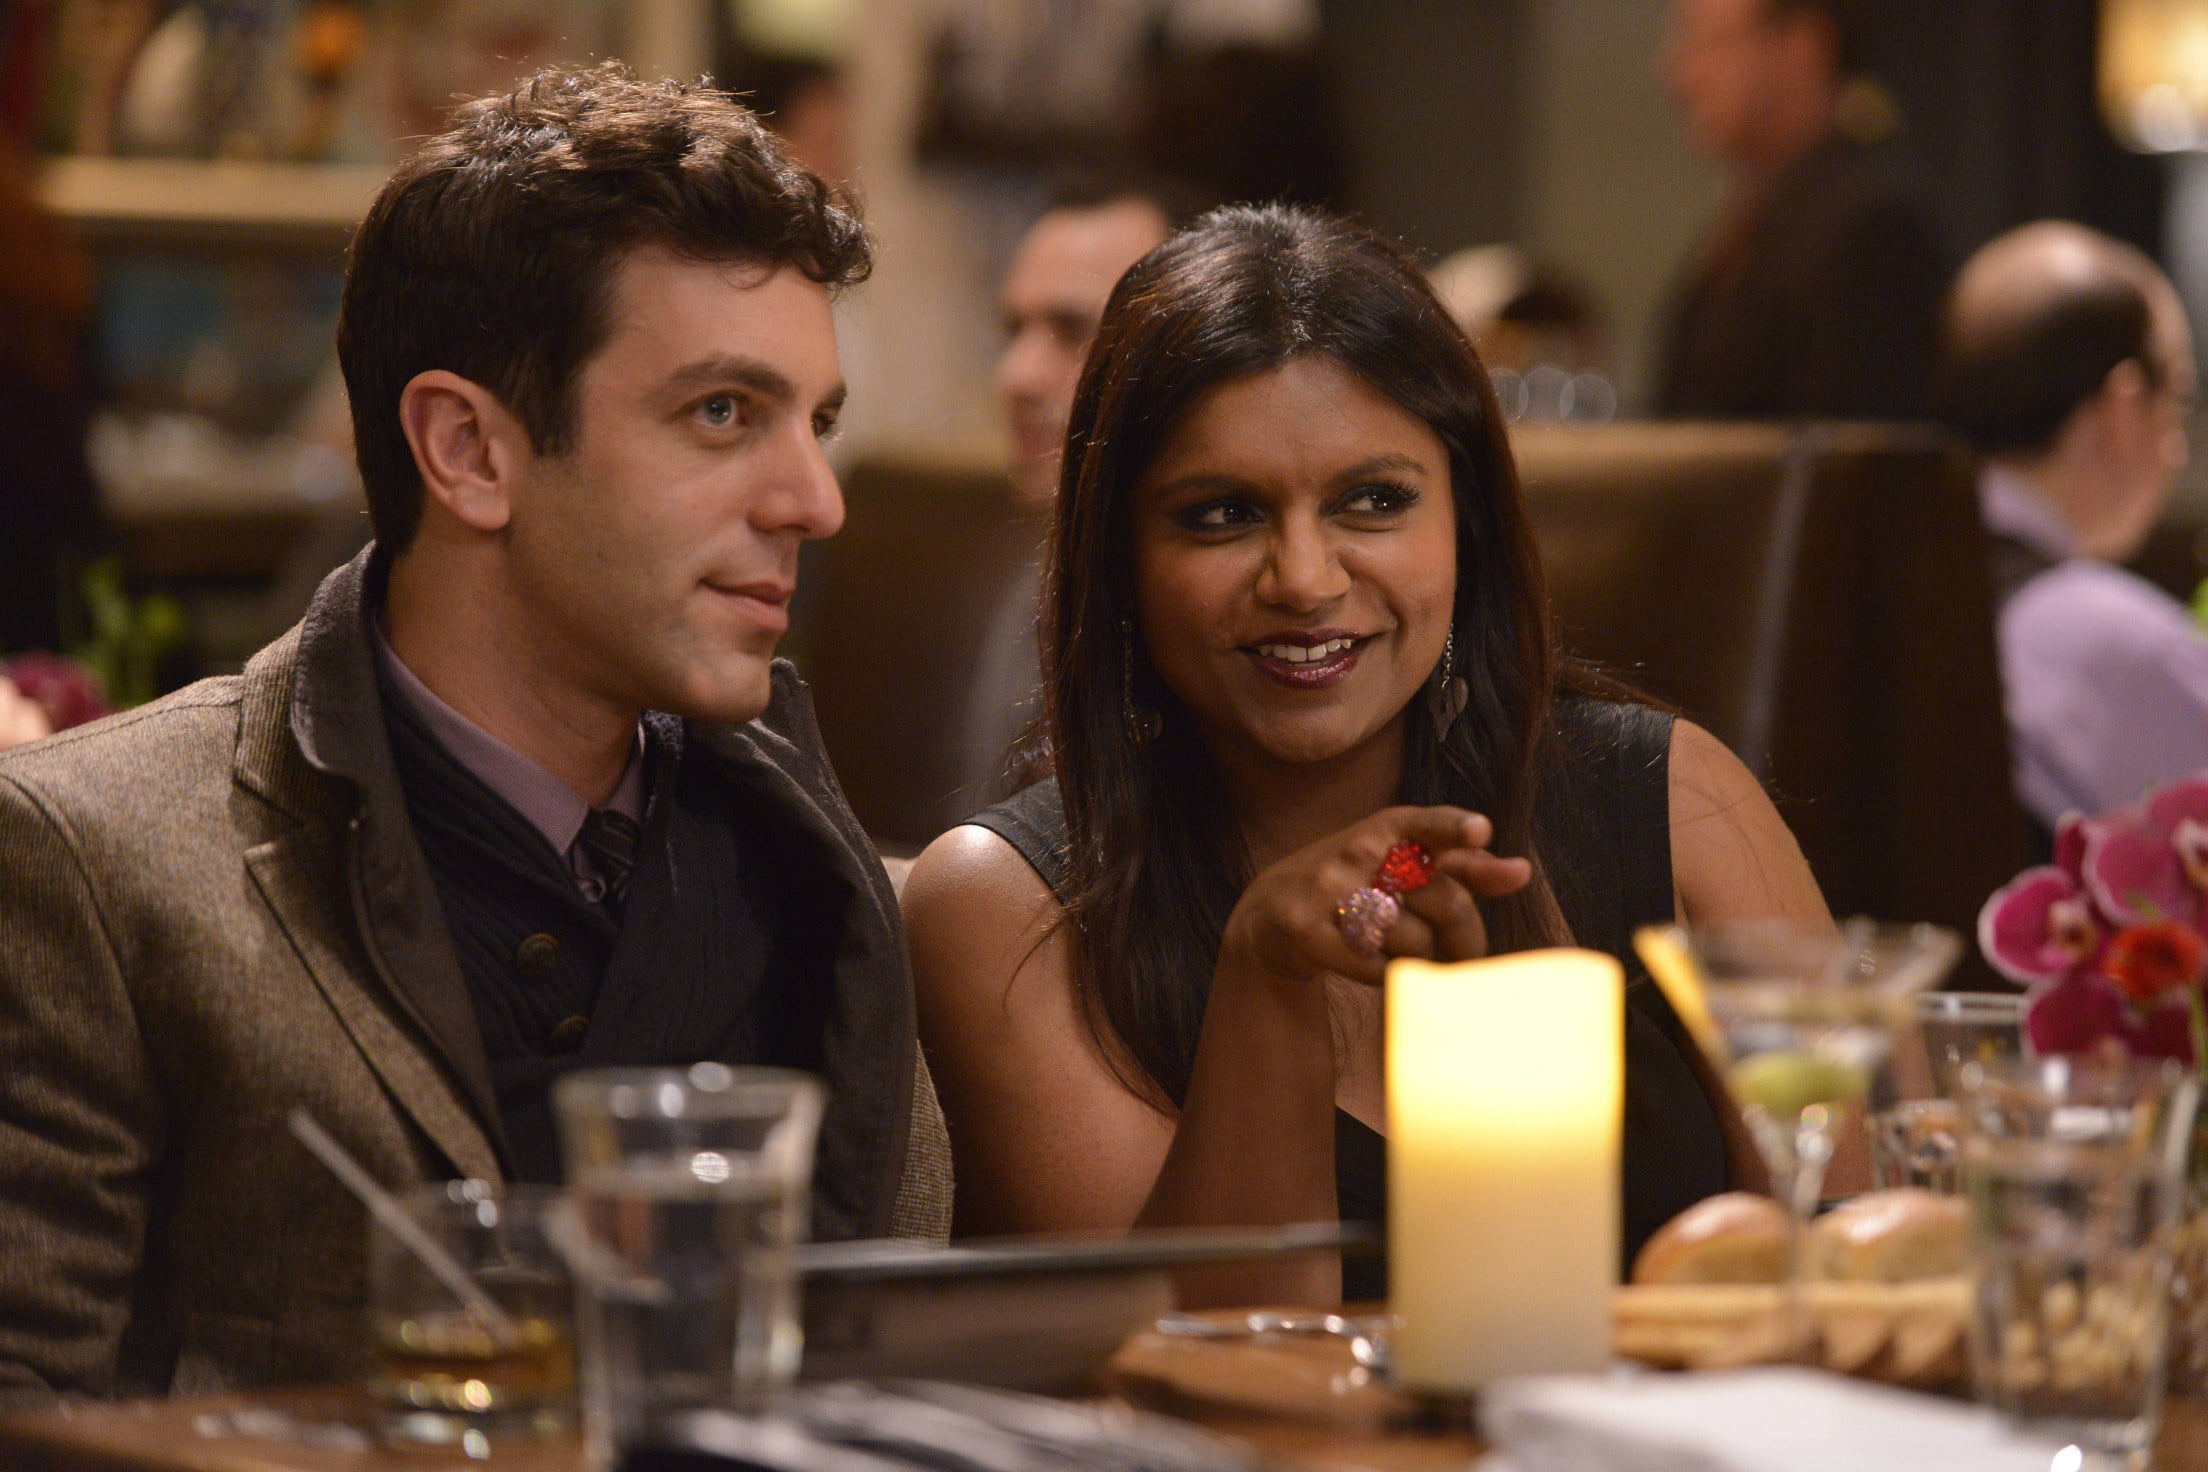 Ranking The Mindy Project's Love interests